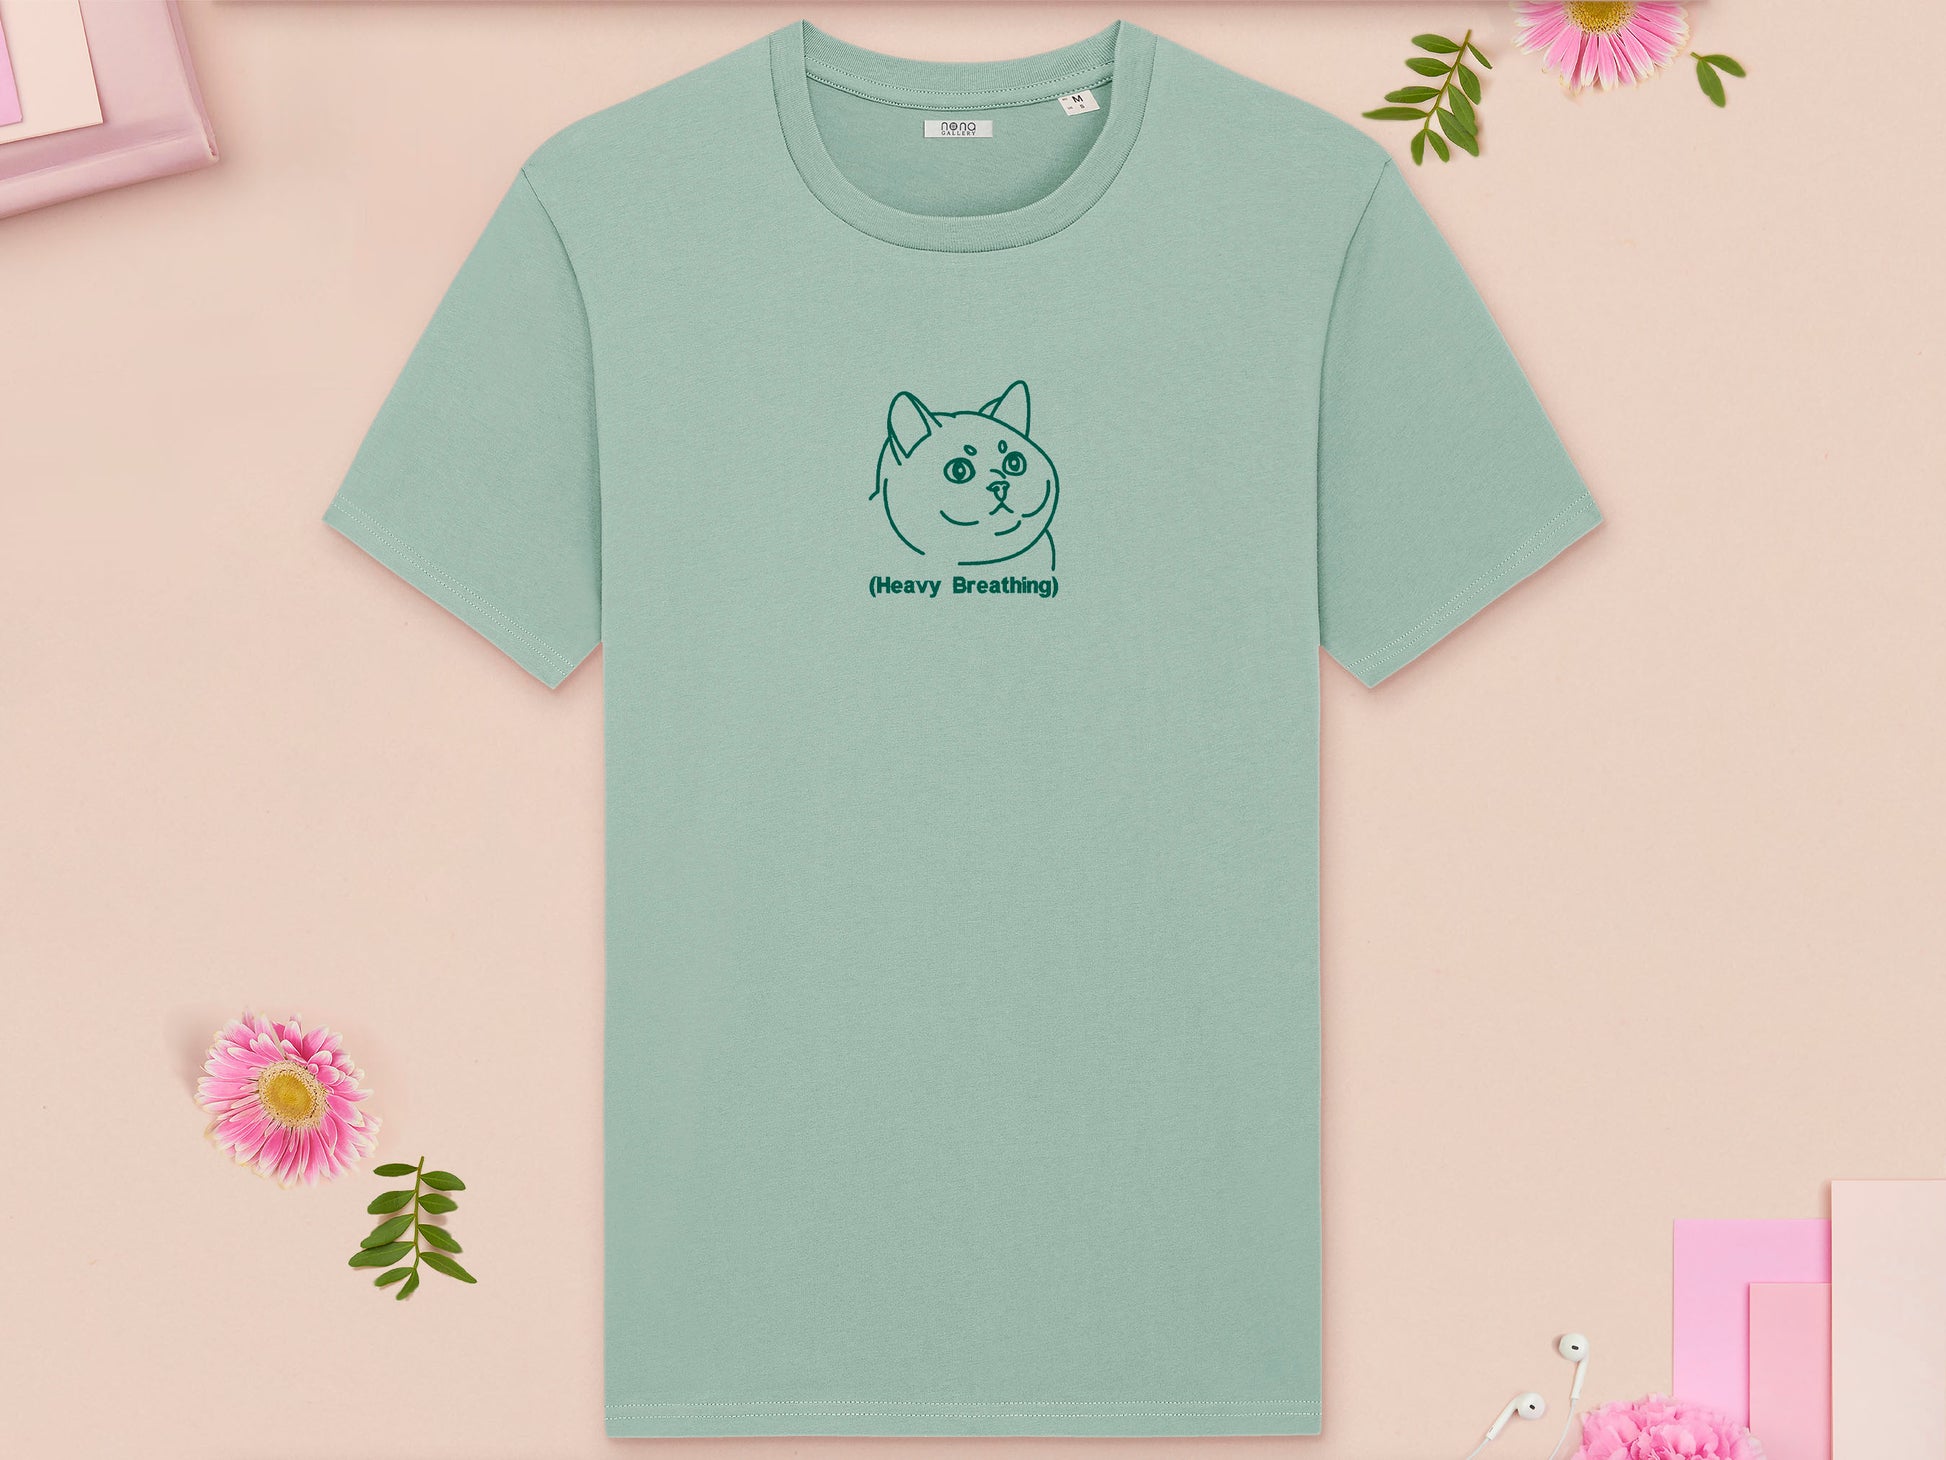 A green crew neck short sleeve t-shirt, with an embroidered green thread design of cute fat cat portrait with text underneath saying (Heavy Breathing)